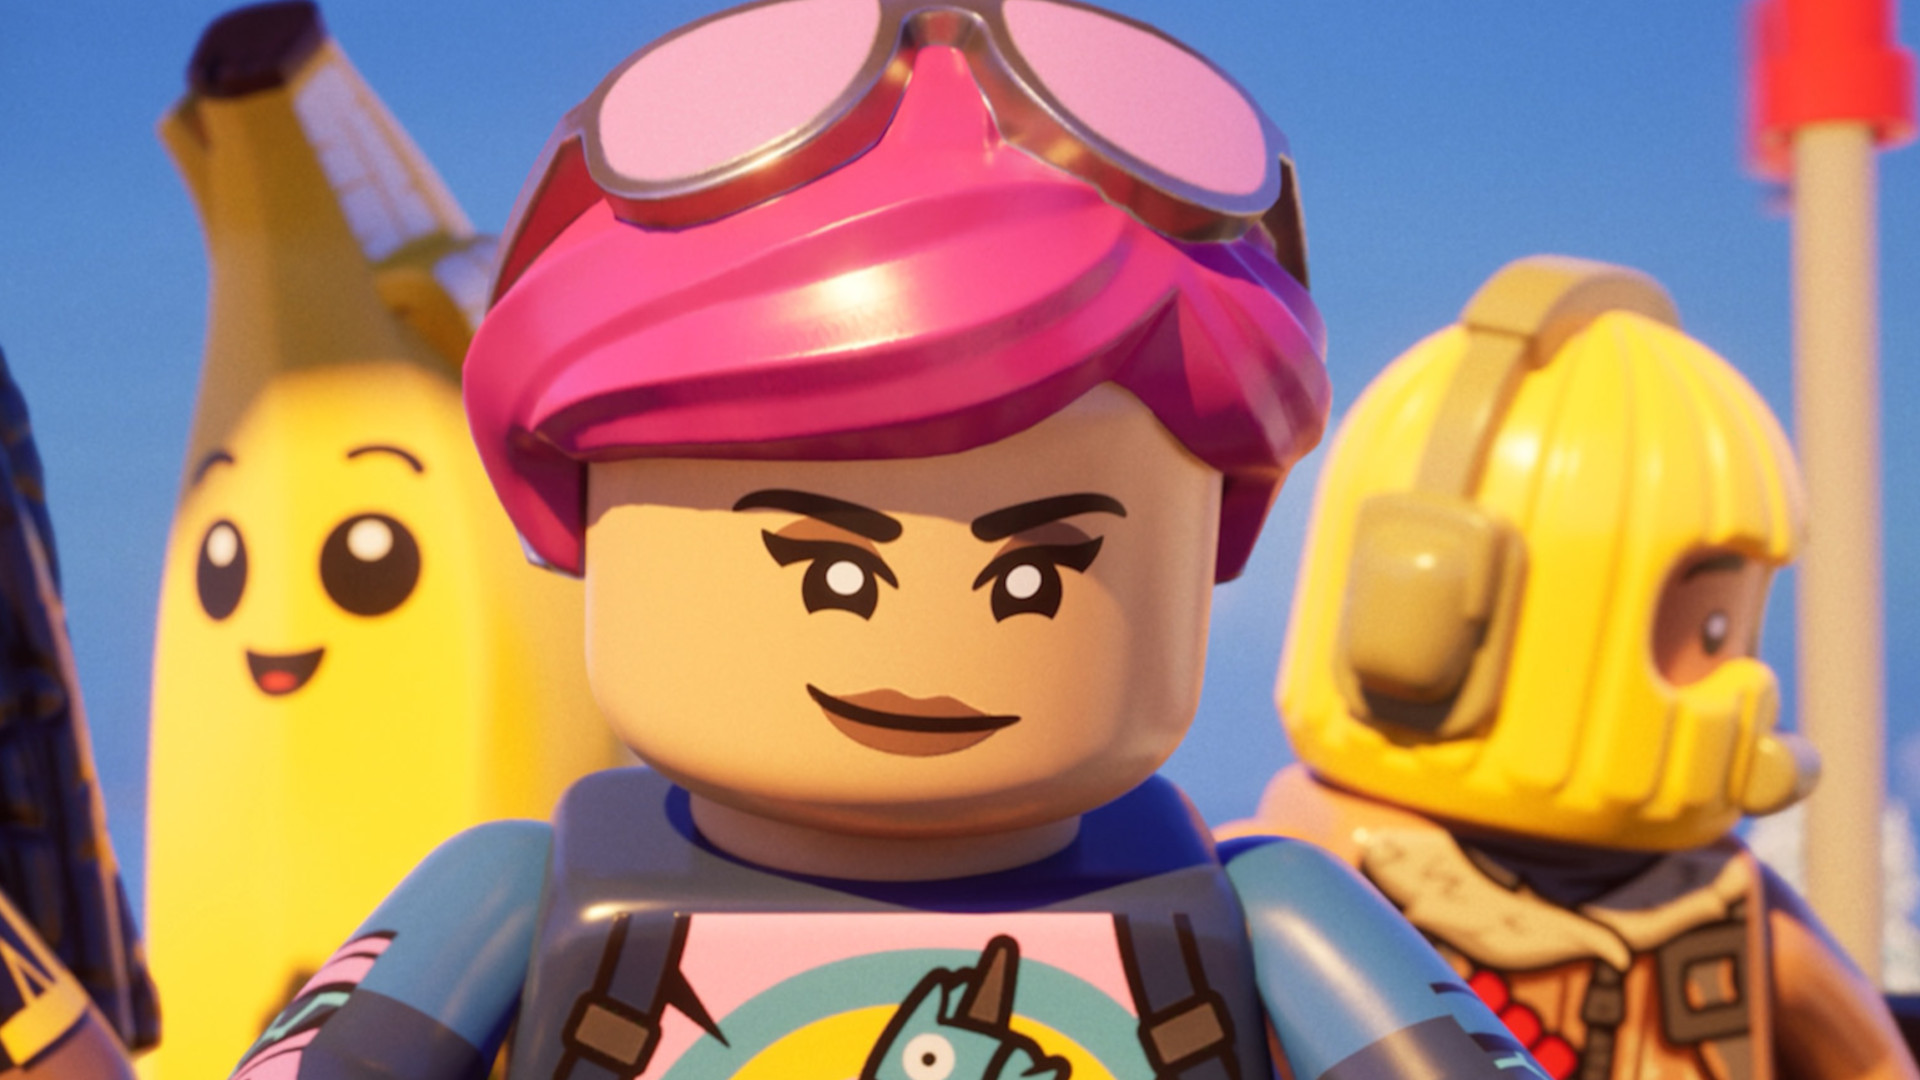 The LEGO Group is making an anime video and needs your help